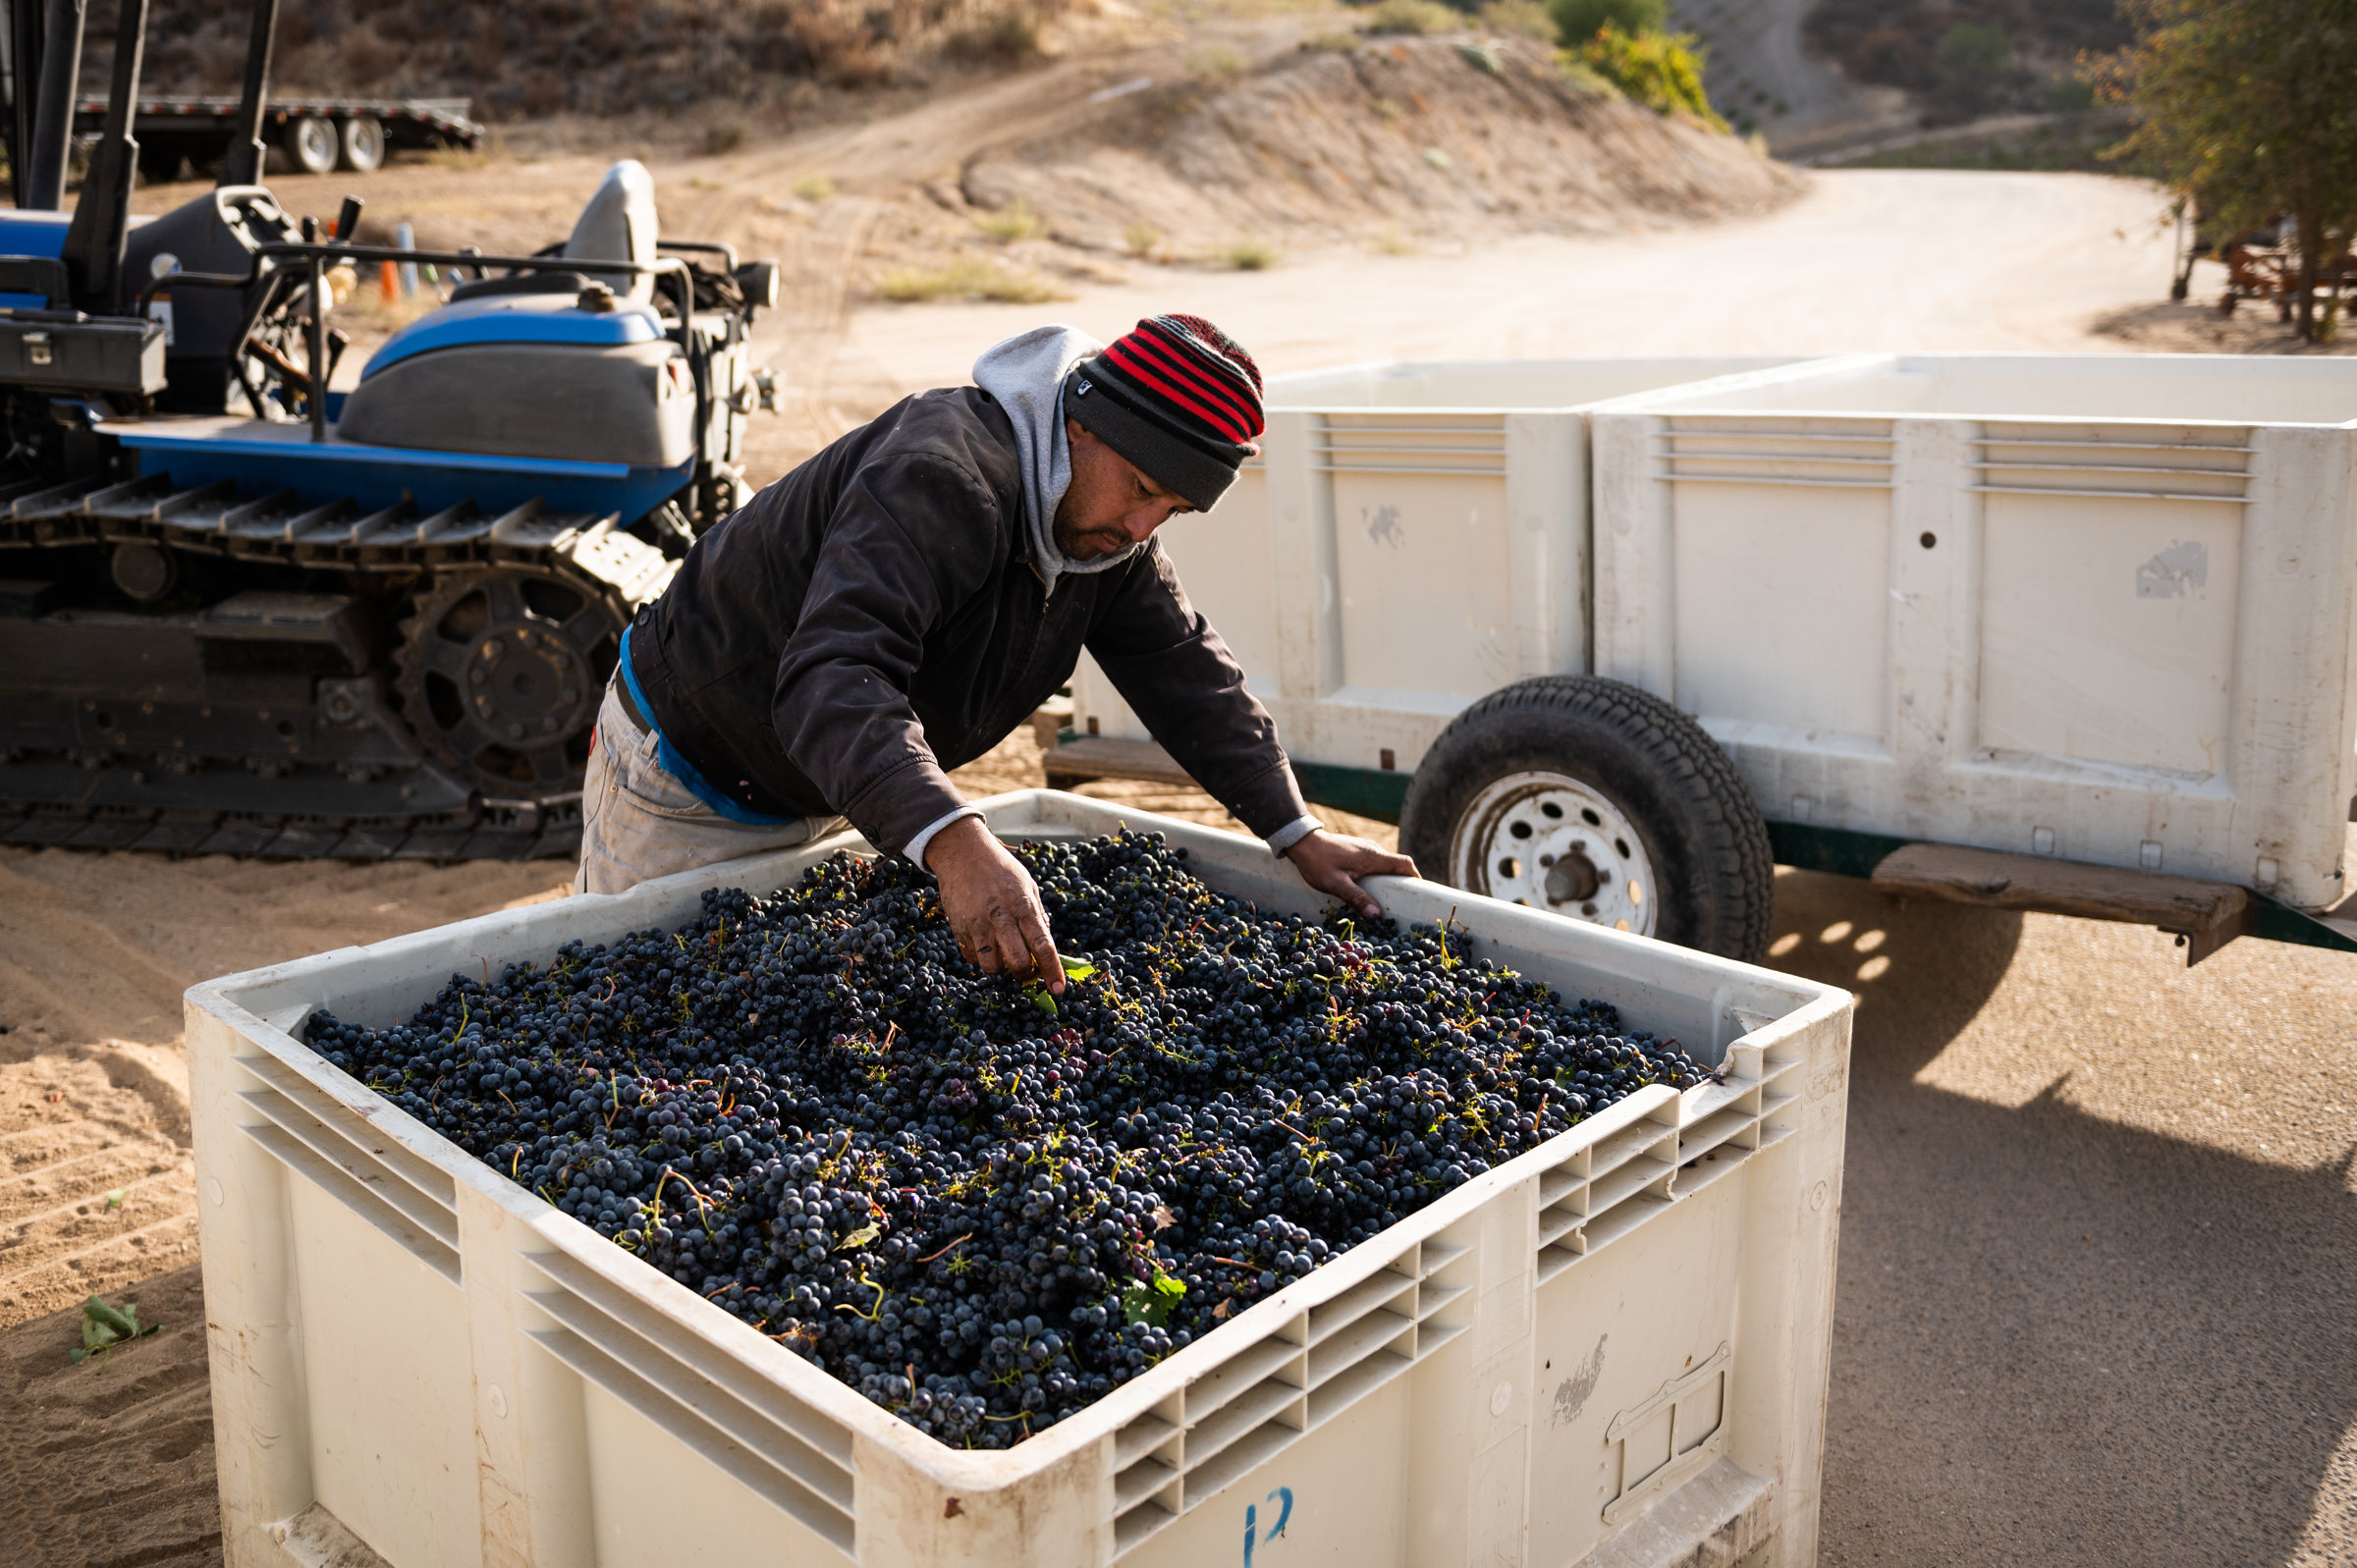 A crew member at Peachy Canyon inspects a bin of wine grapes, removing leaves and debris